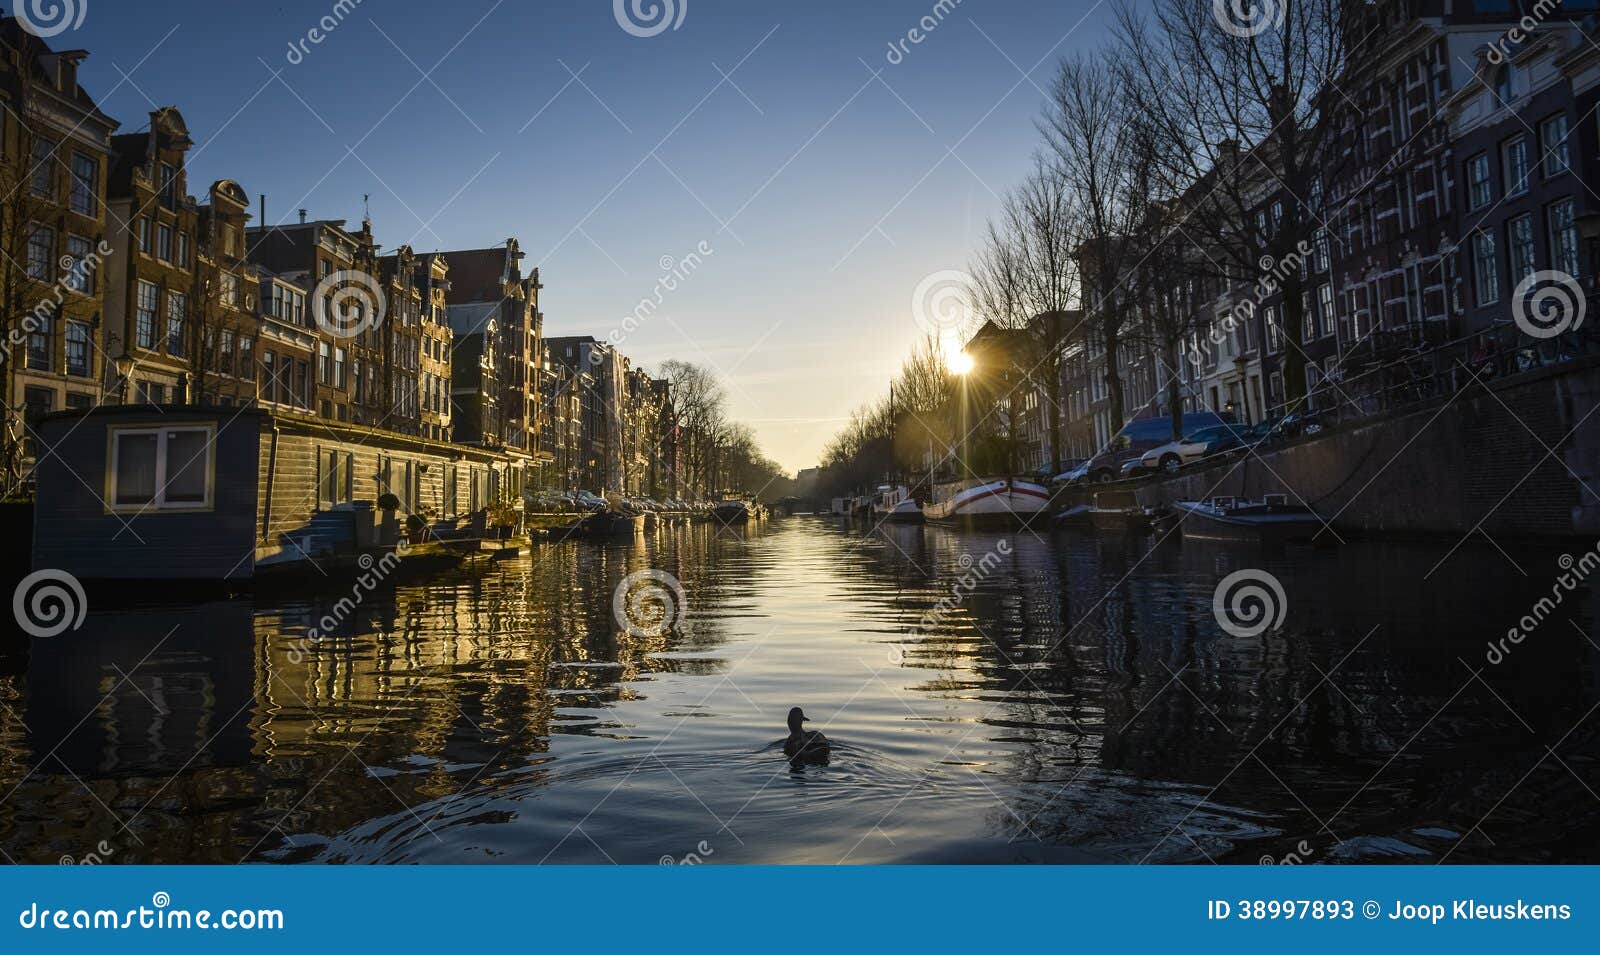 Duck swimming in the canal of Amsterdam between the boats and houses.